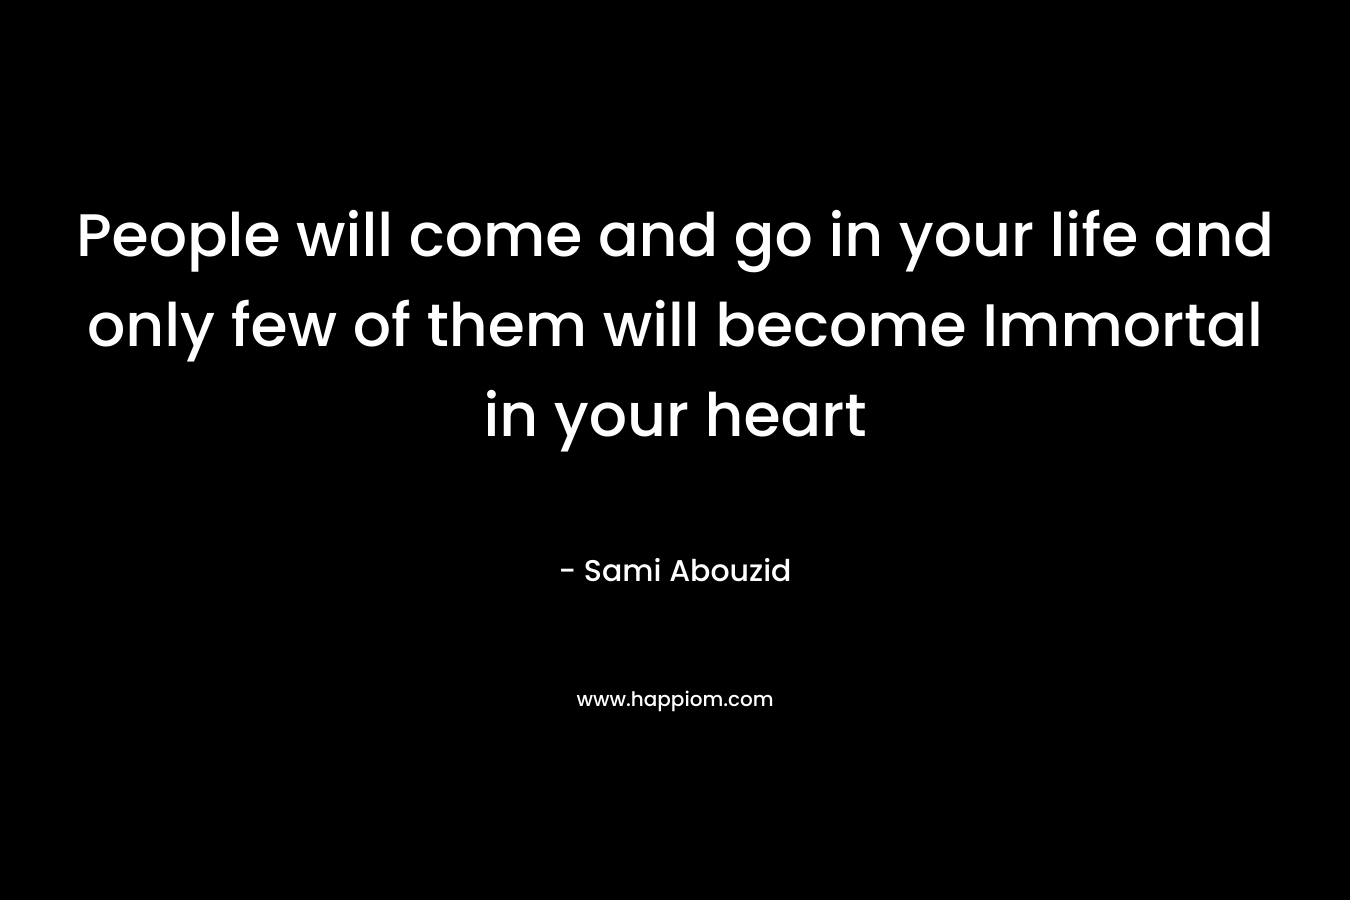 People will come and go in your life and only few of them will become Immortal in your heart